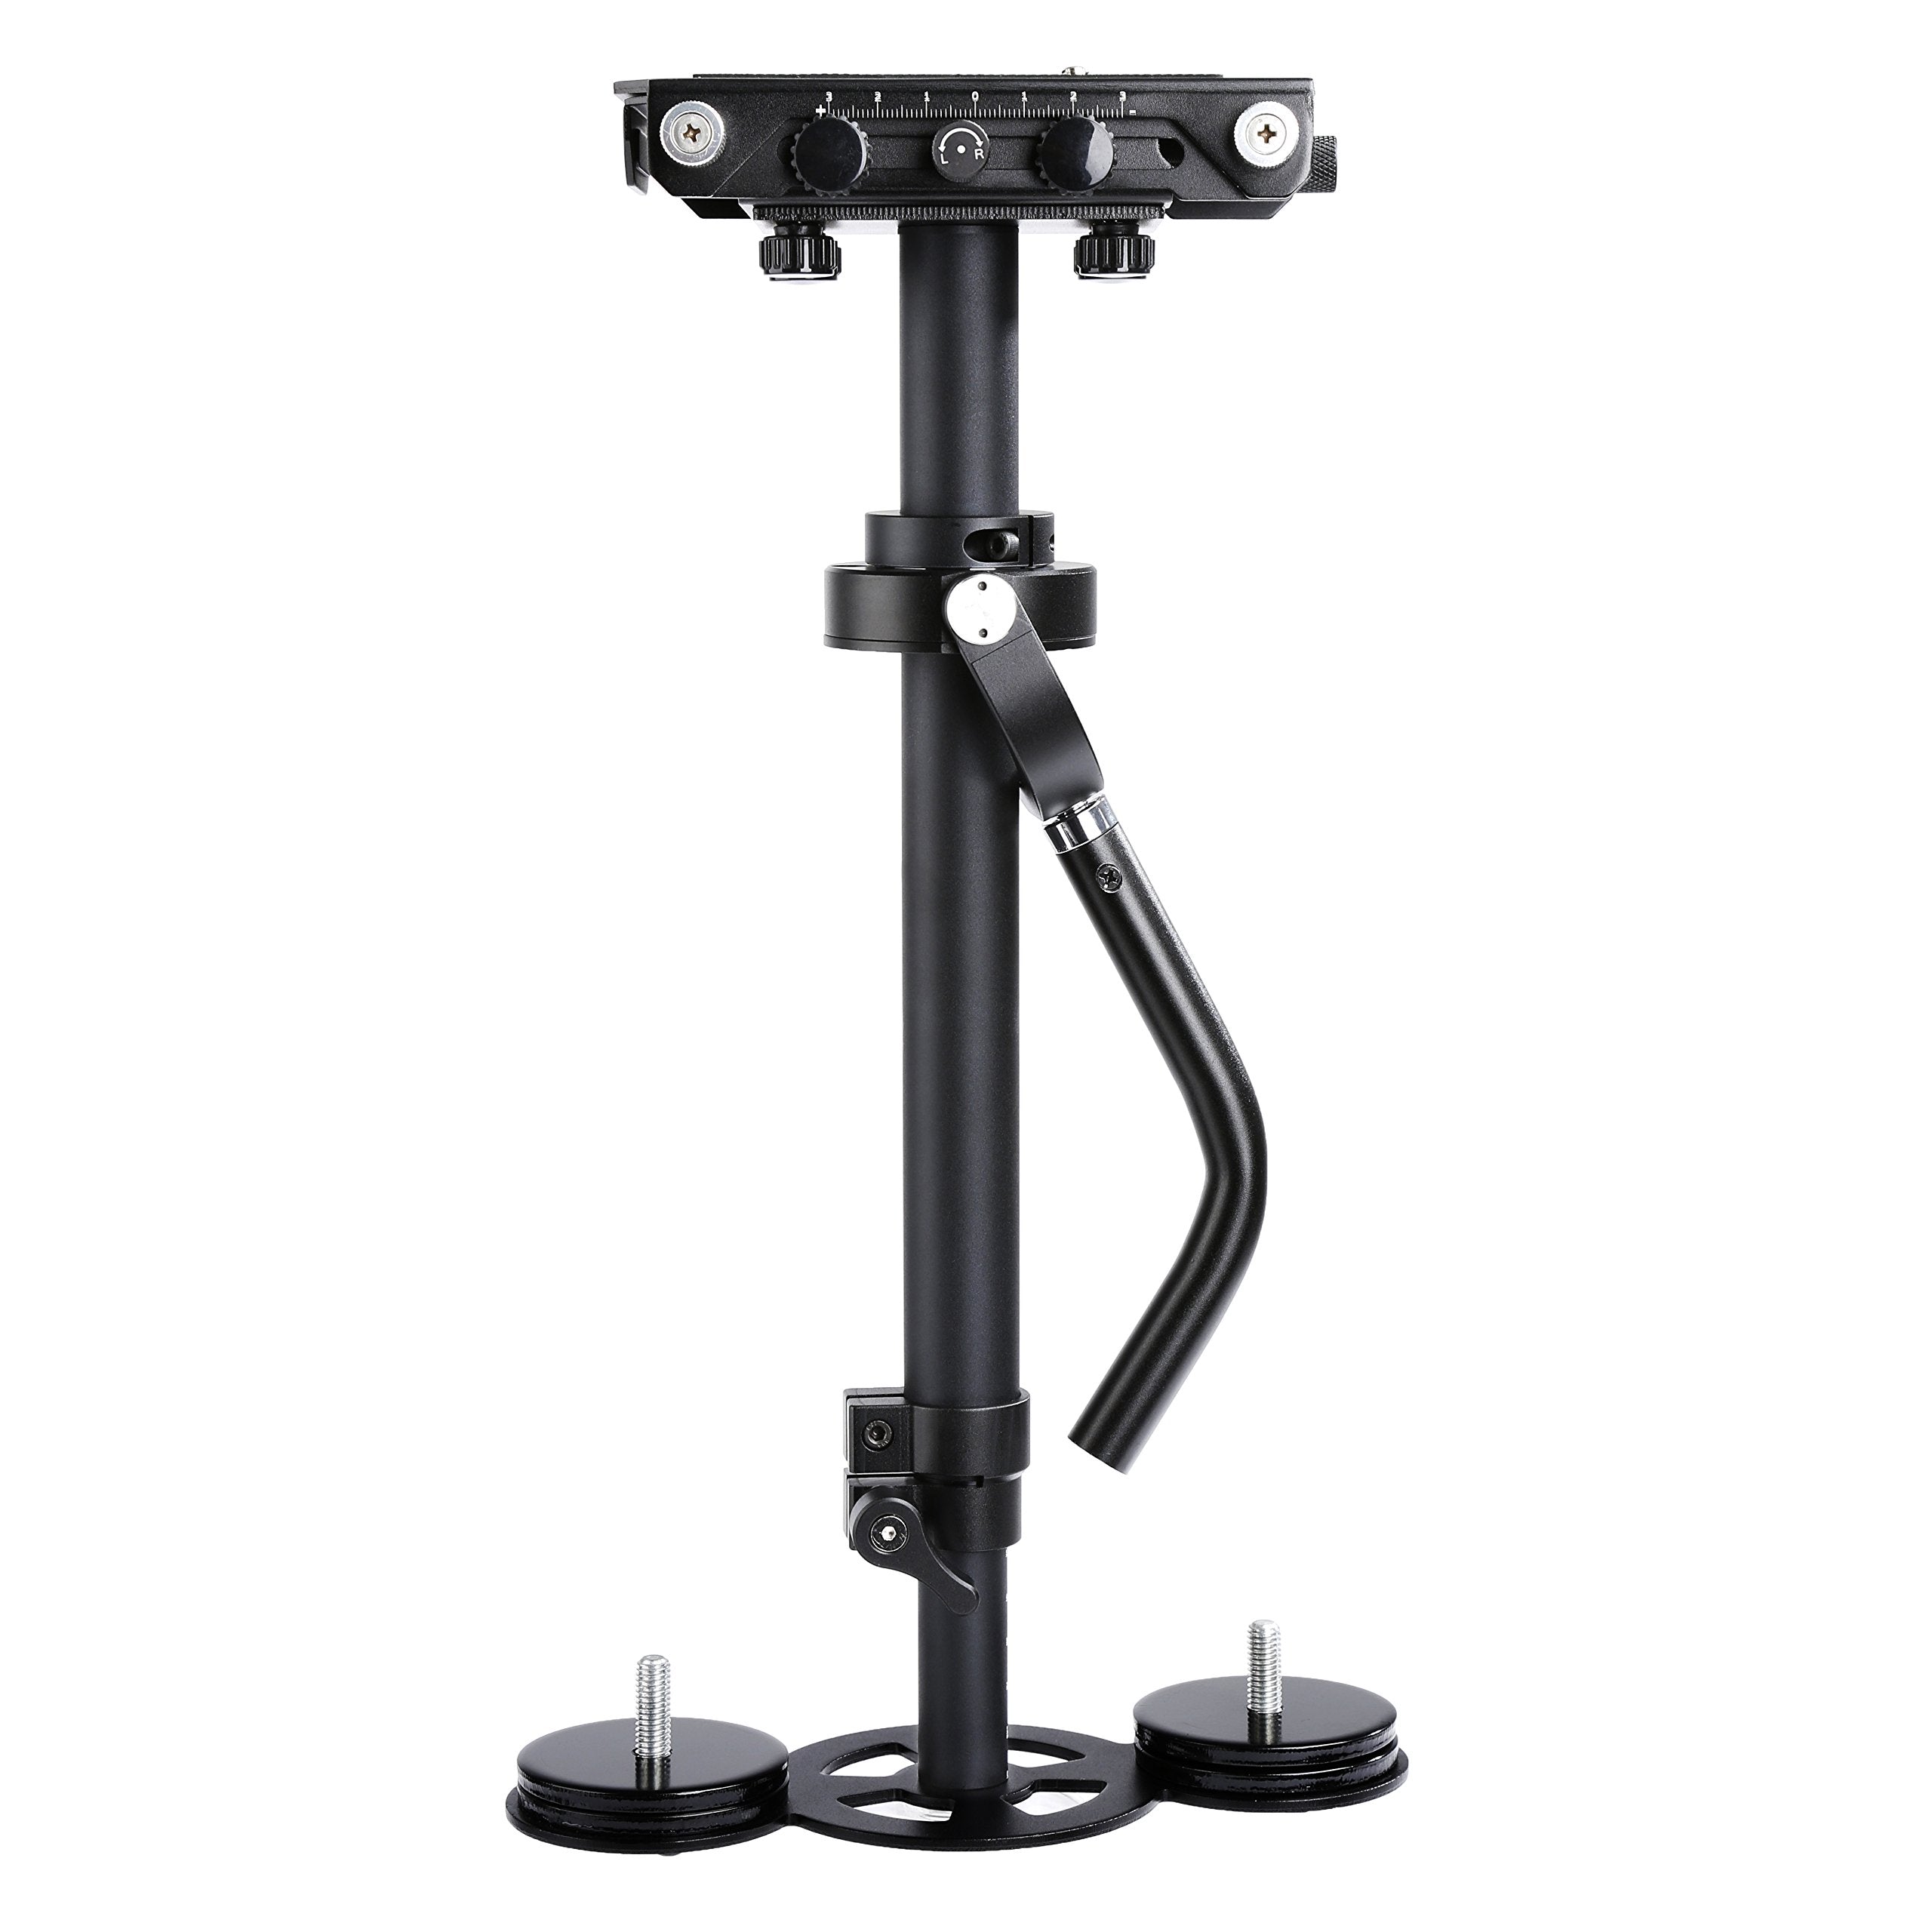 Movo VS3000PRO Telescoping Video Stabilizer System with Micro Balancing and Quick Release Platform - For DSLR Cameras and Camcorders up to 4.4 LBS  - Like New